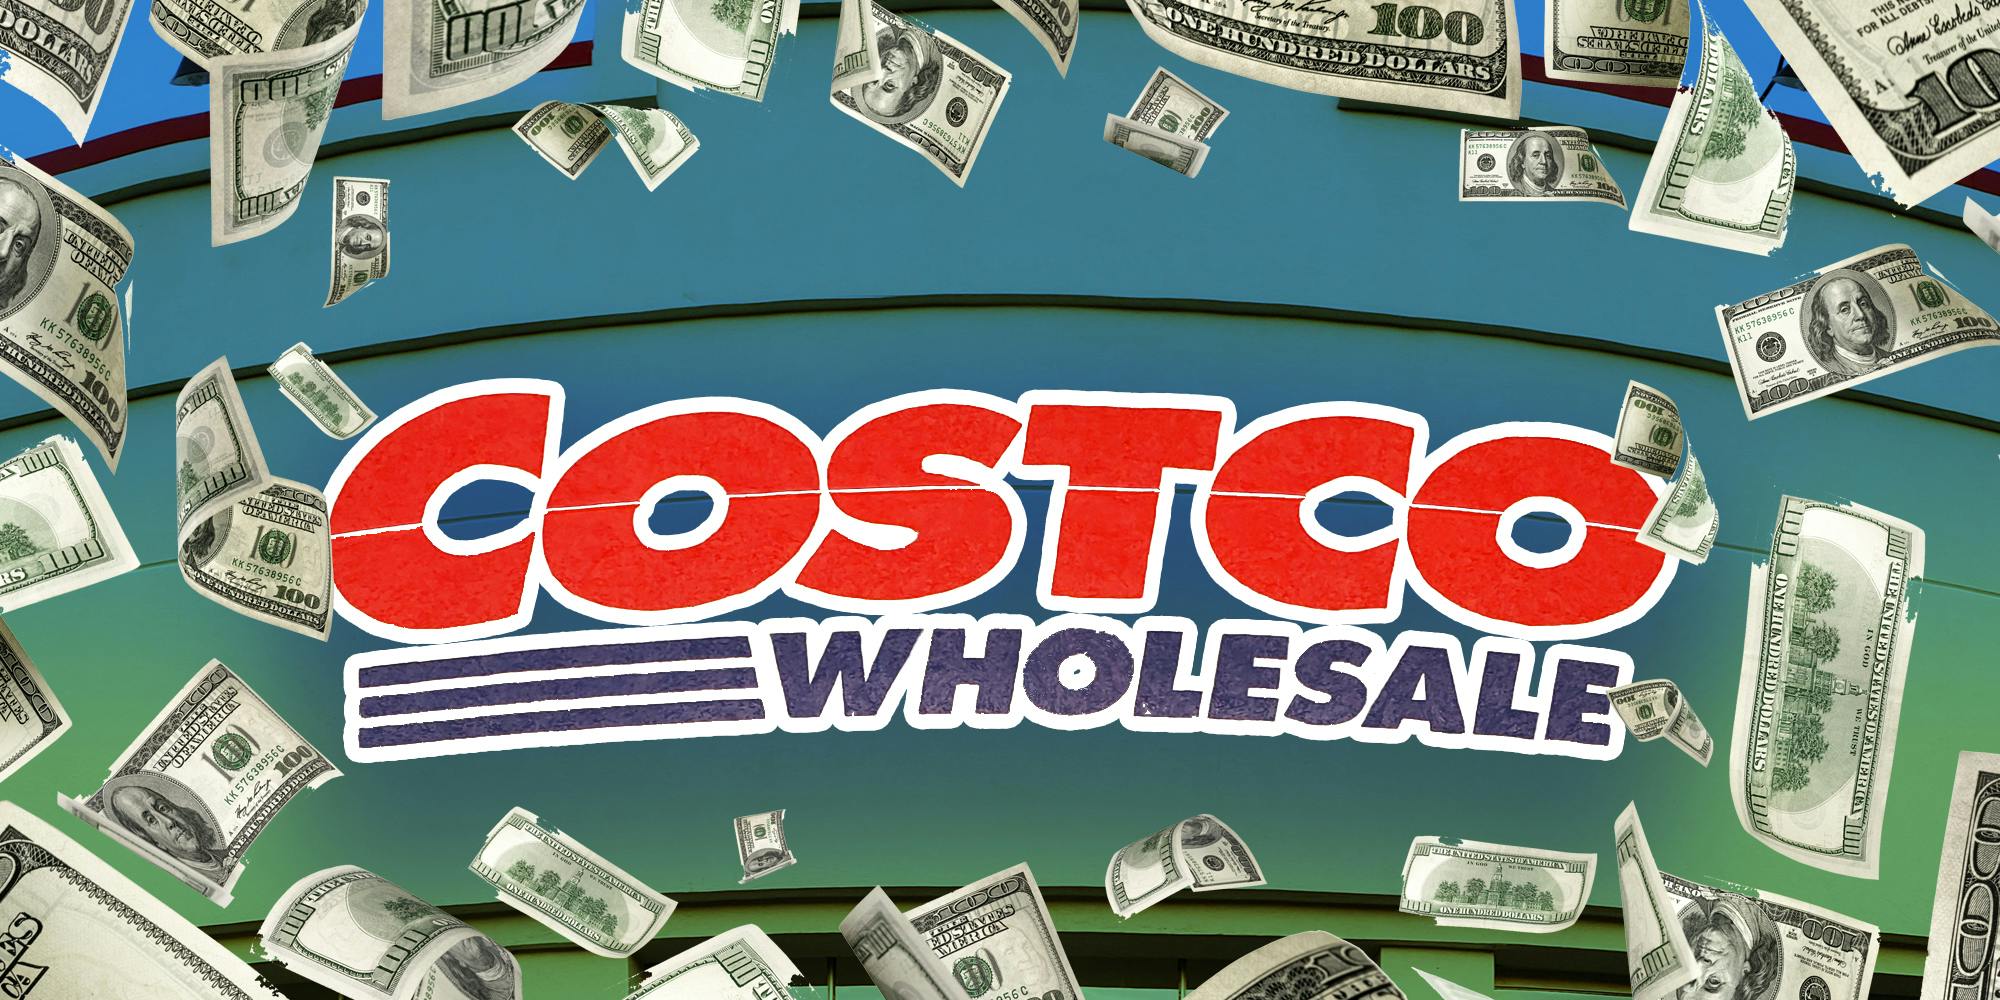 Costco surrounded by money